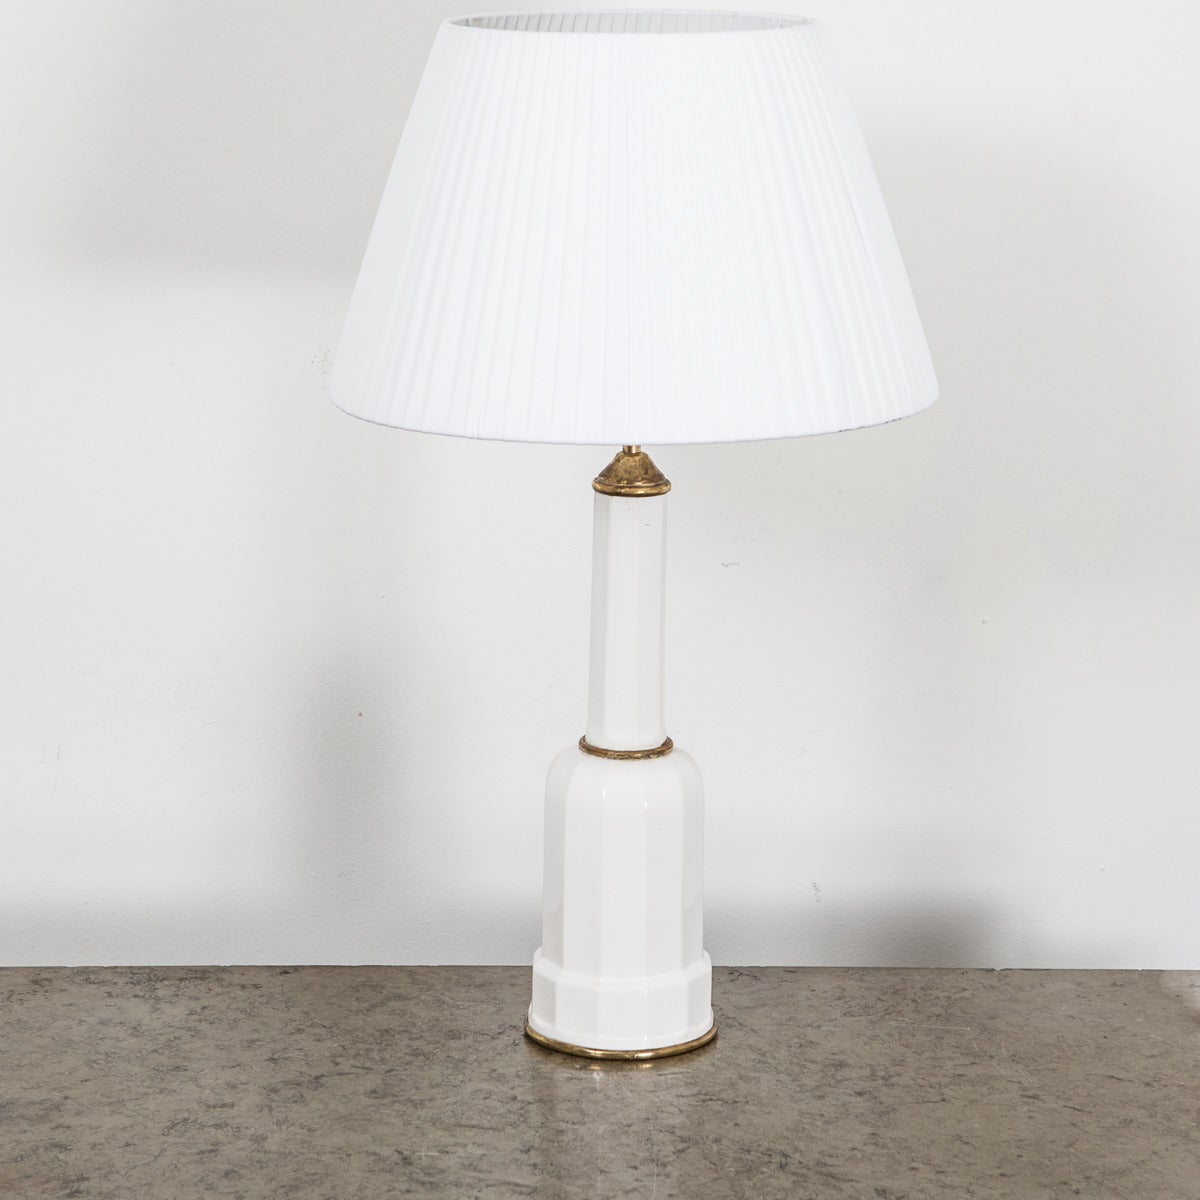 Table lamps in porcelain and brass, made during the 20th century.

Height is 19.5